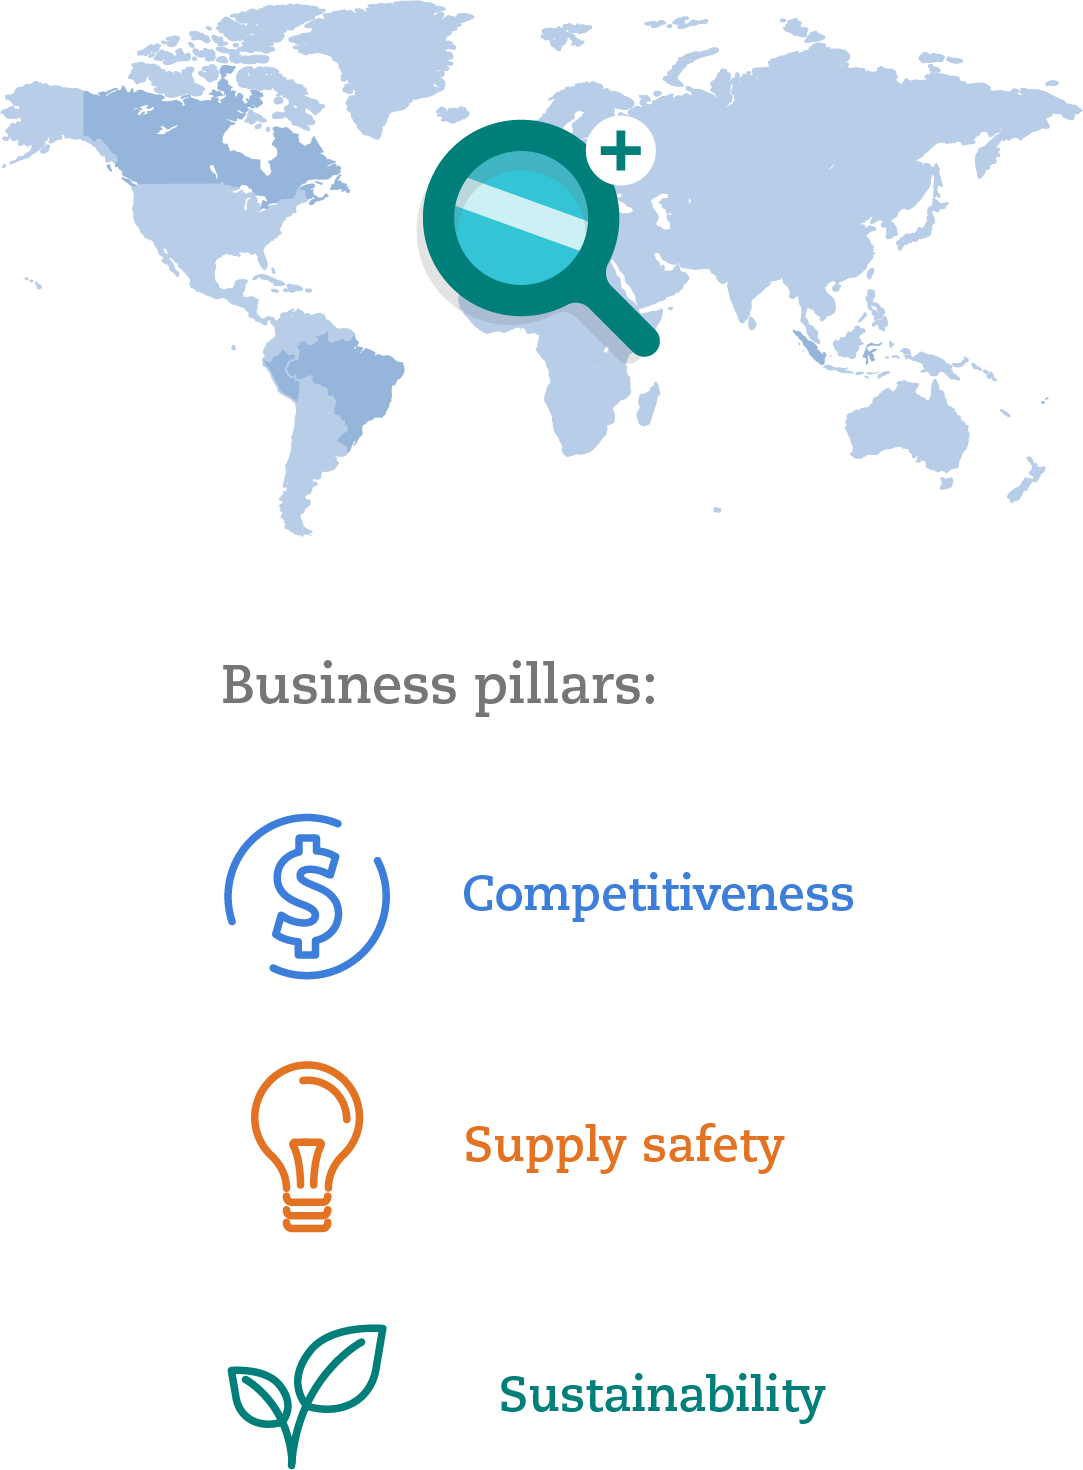 Business pillars: Competitiveness; Supply safety; Sustainability